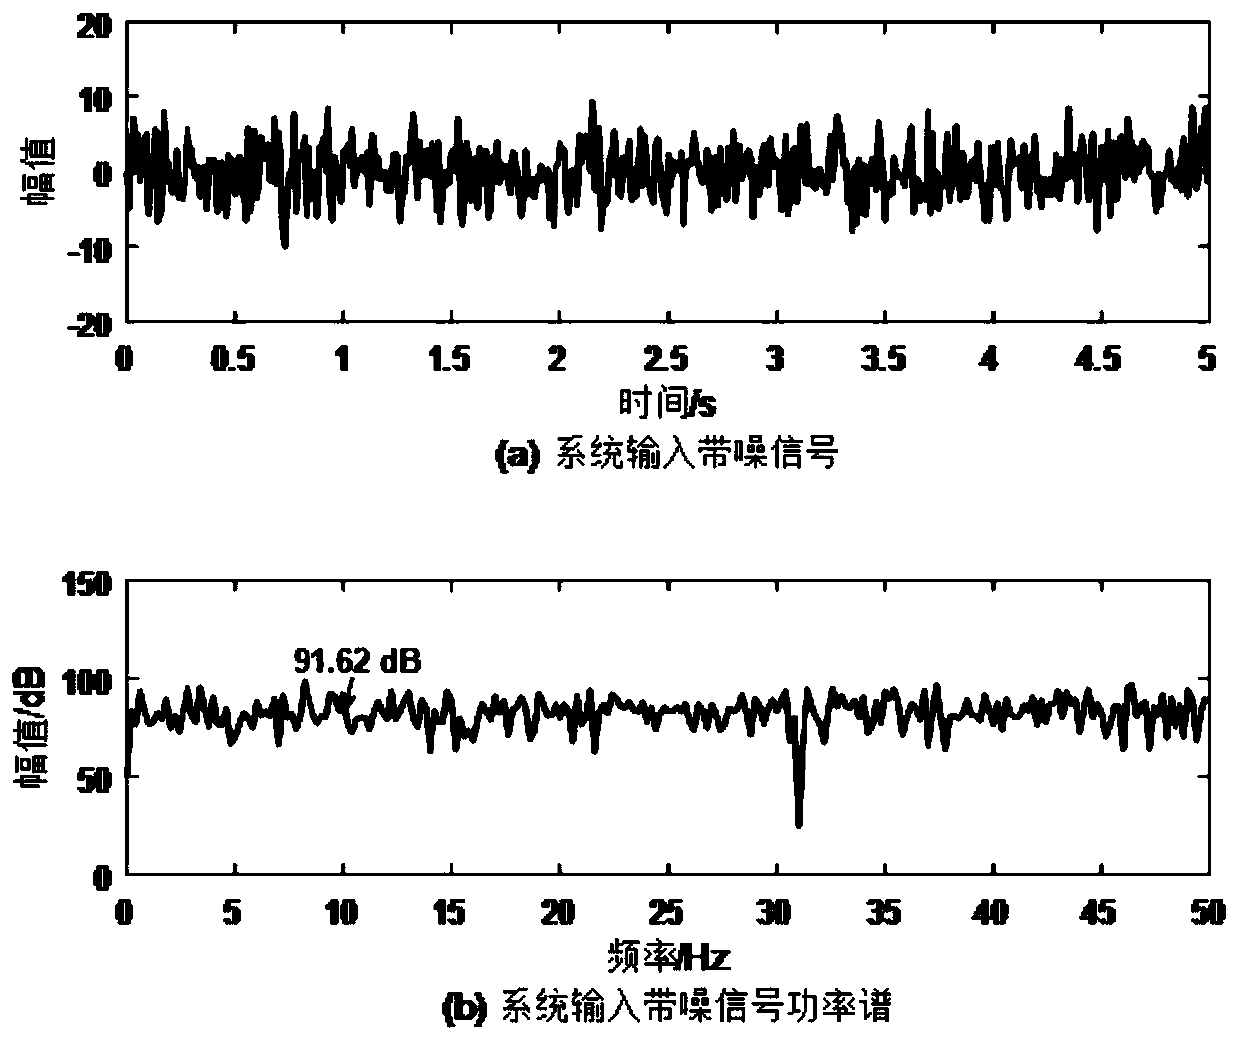 Seismic wave feature extraction method self-adaptive to stochastic resonance